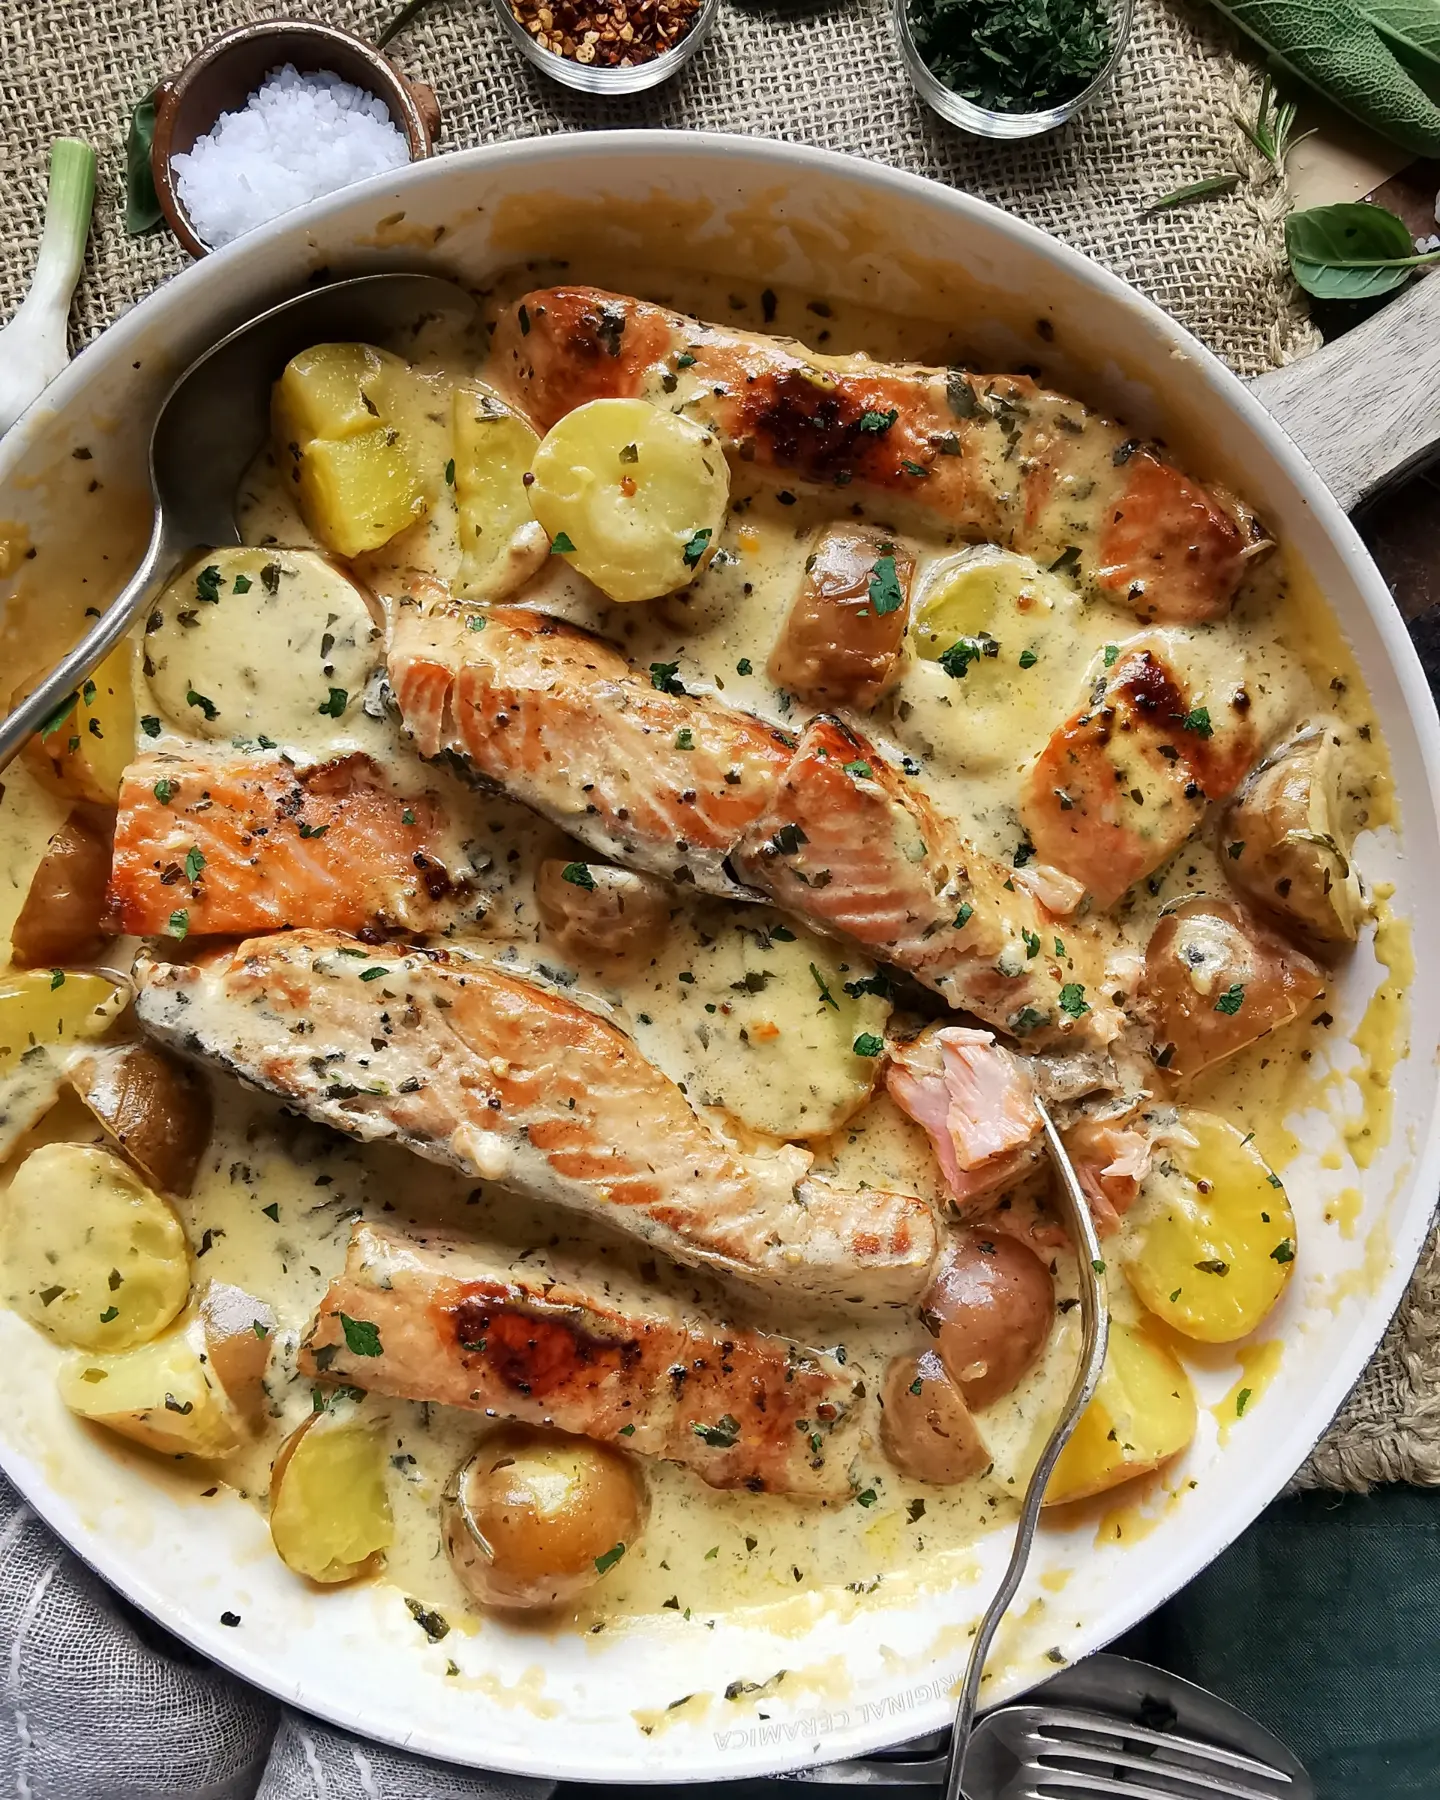 Salmon with herbs and cream sauce